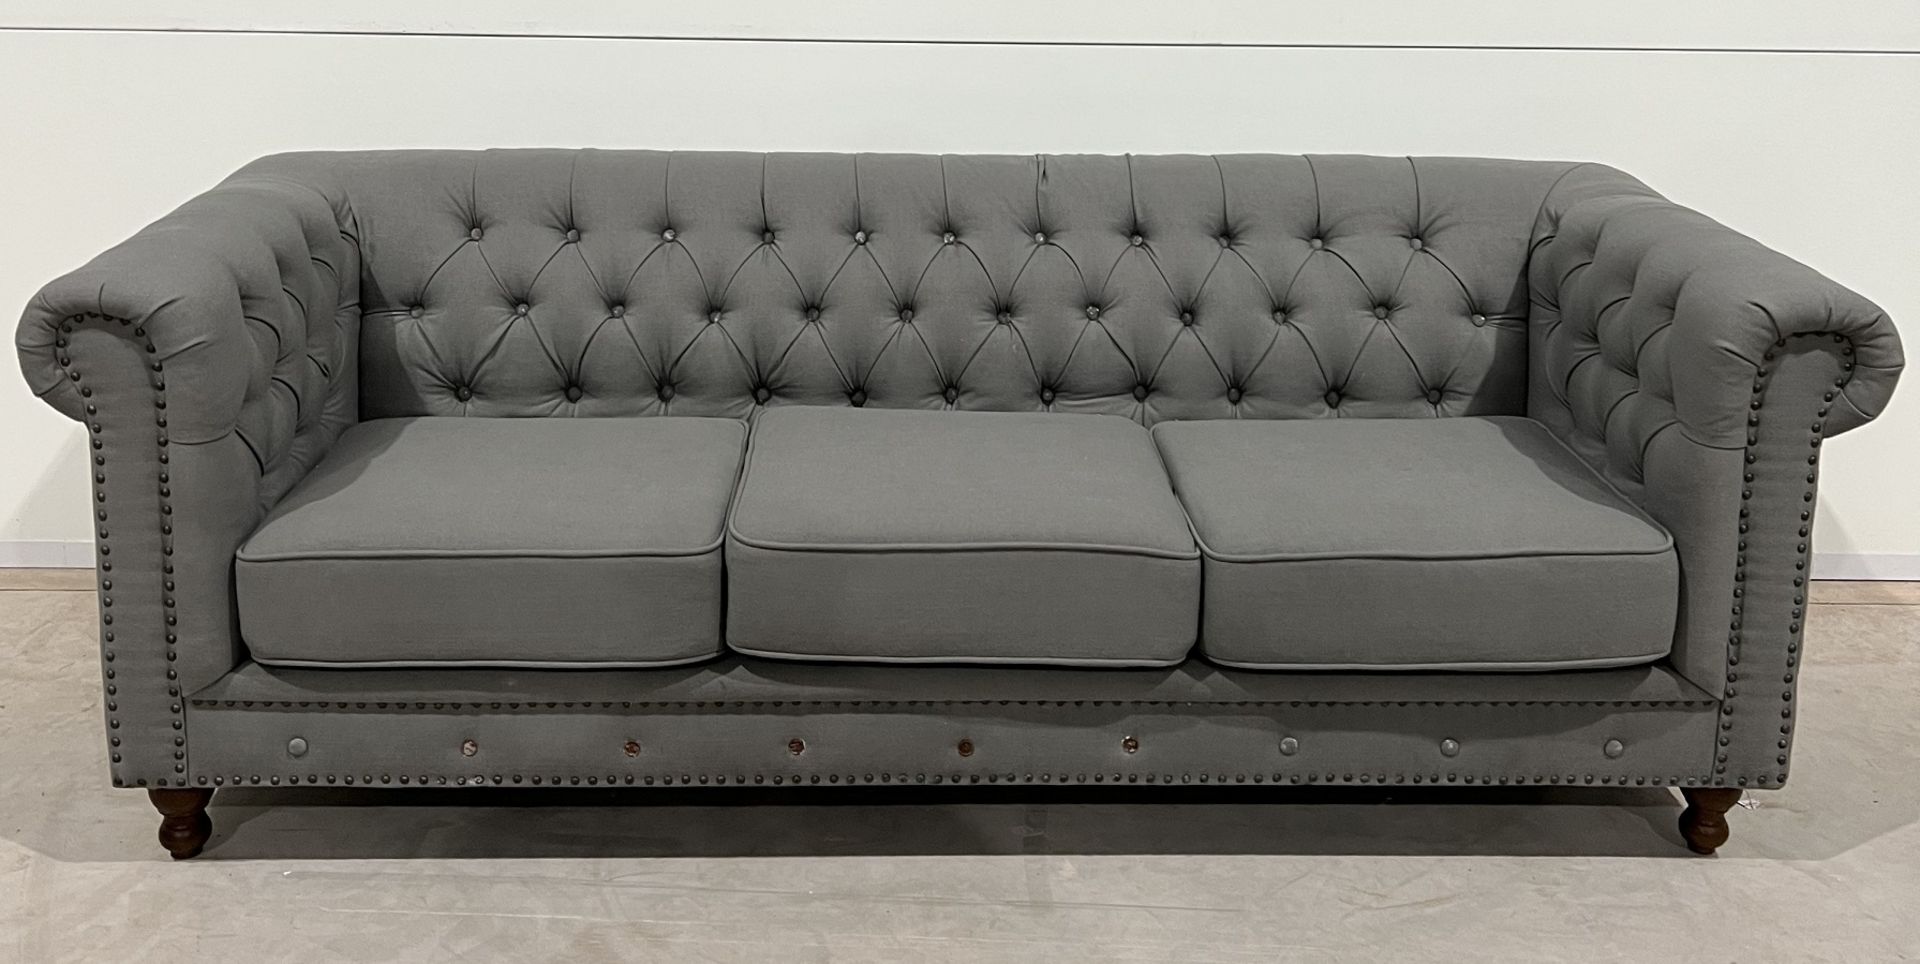 Milano Chesterfield Grey Plush Fabric Three Seater Sofa Exudes Modern Luxury With Raditional